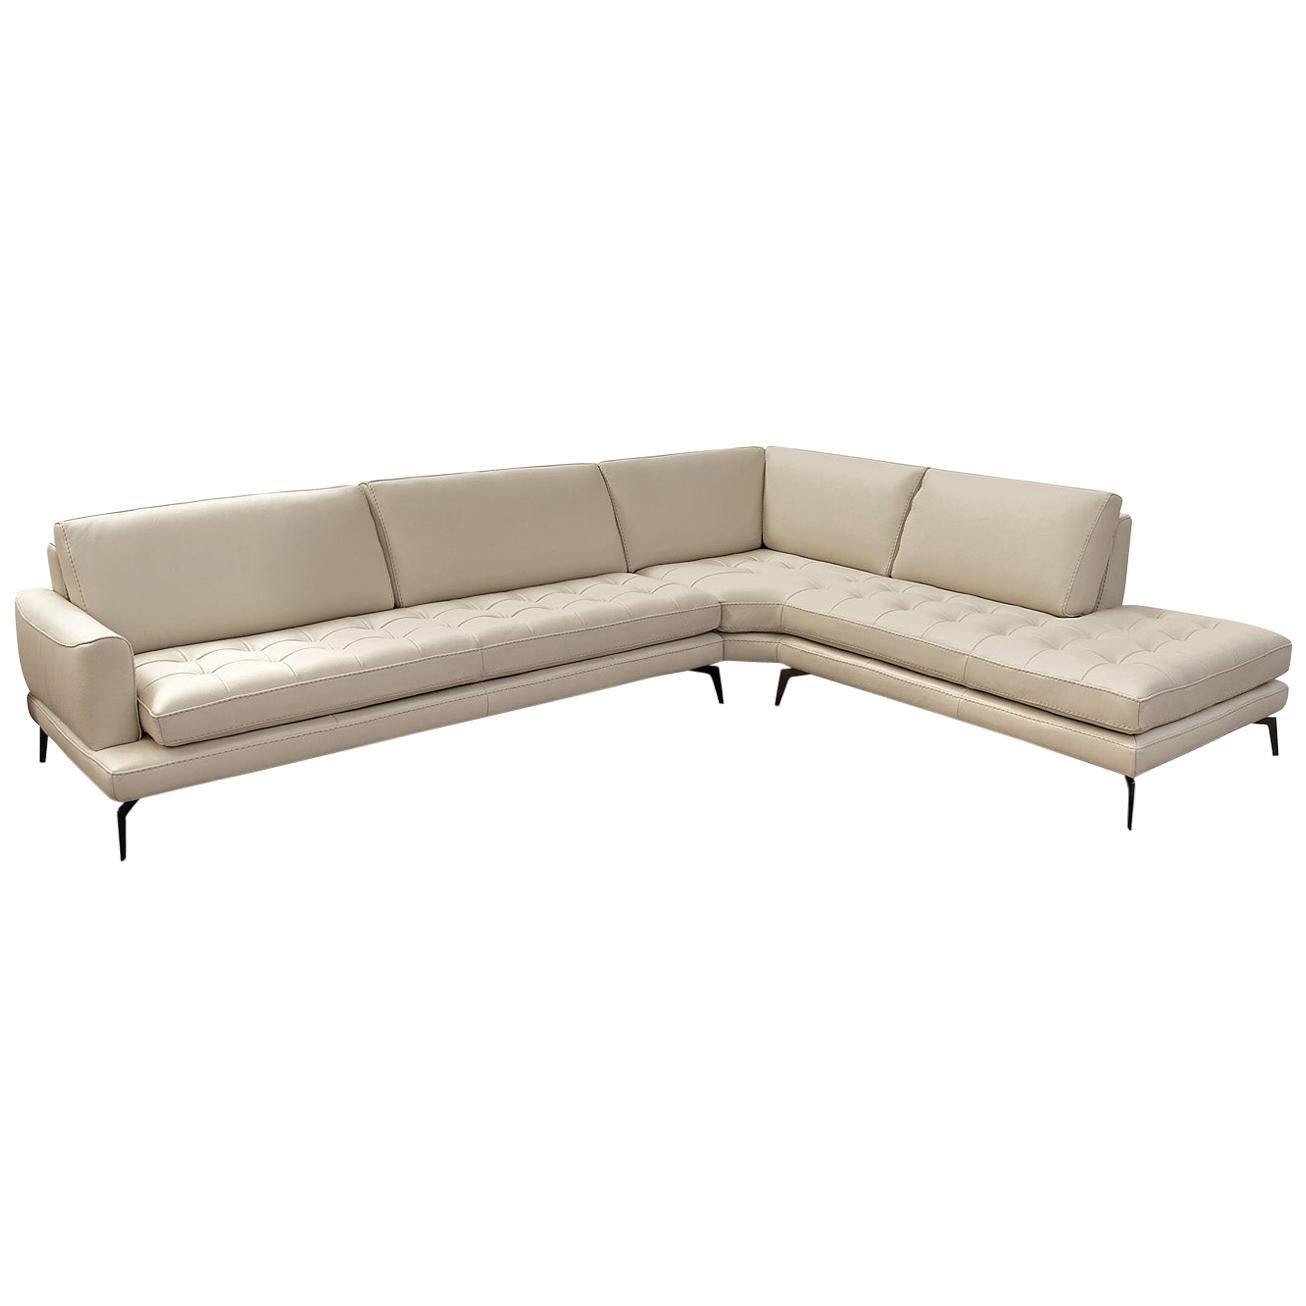 Lifetime Italian Leather Sectional Chaise Tufting Tone on Tone Stitching